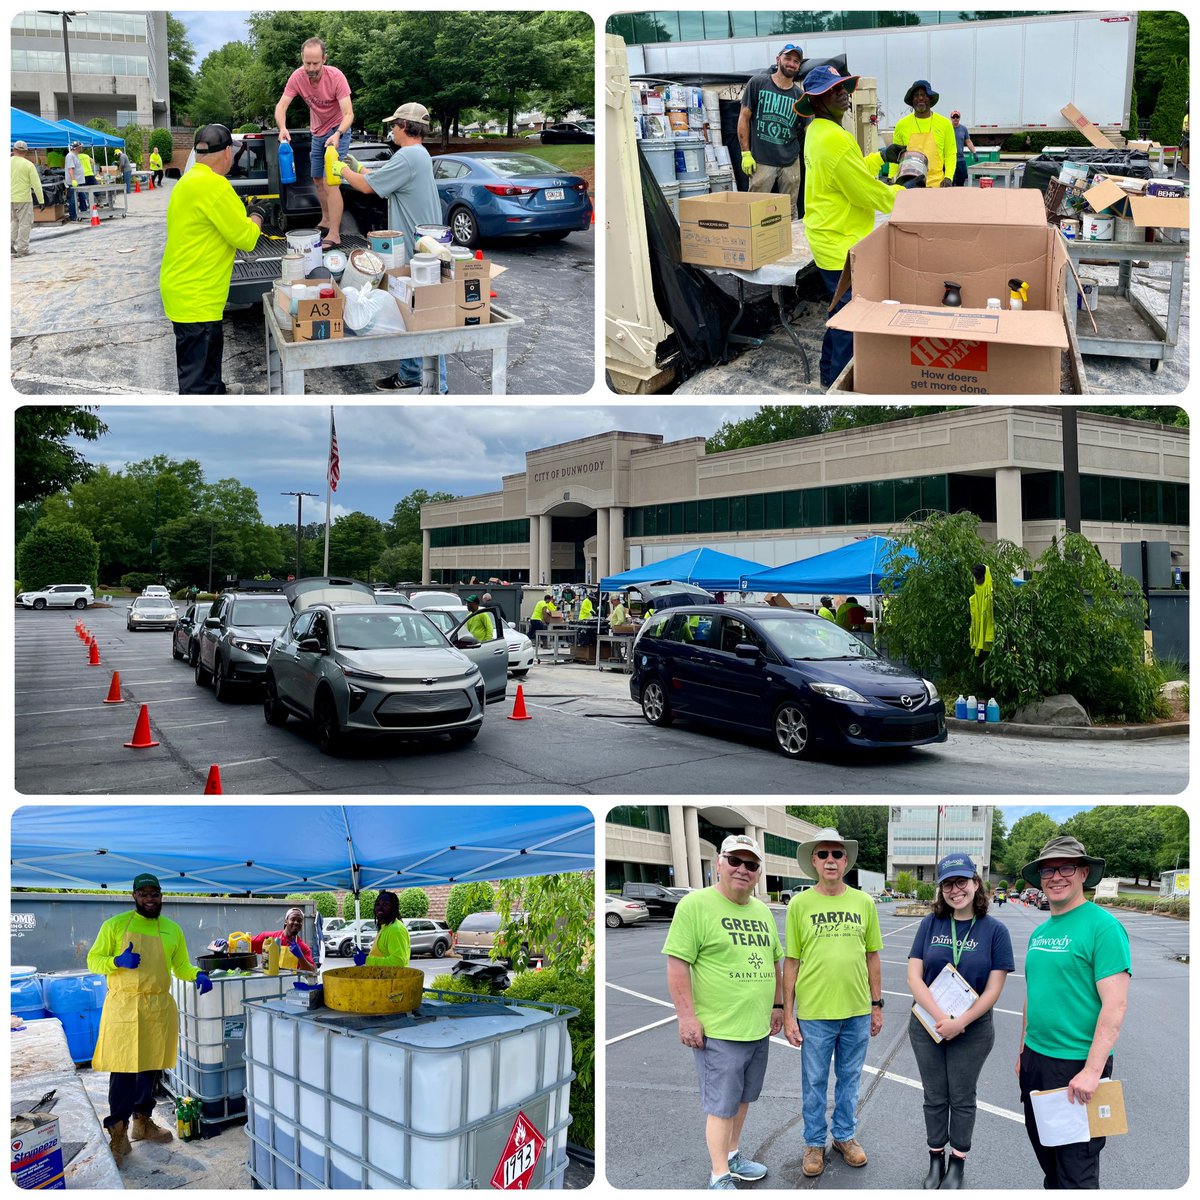 We had a great turnout for today’s household hazardous waste recycling event at Dunwoody City Hall! Thanks to the Dunwoody Community Development Department + Dunwoody Sustainability Committee for organizing. We’ll offer electronics recycling in the fall.